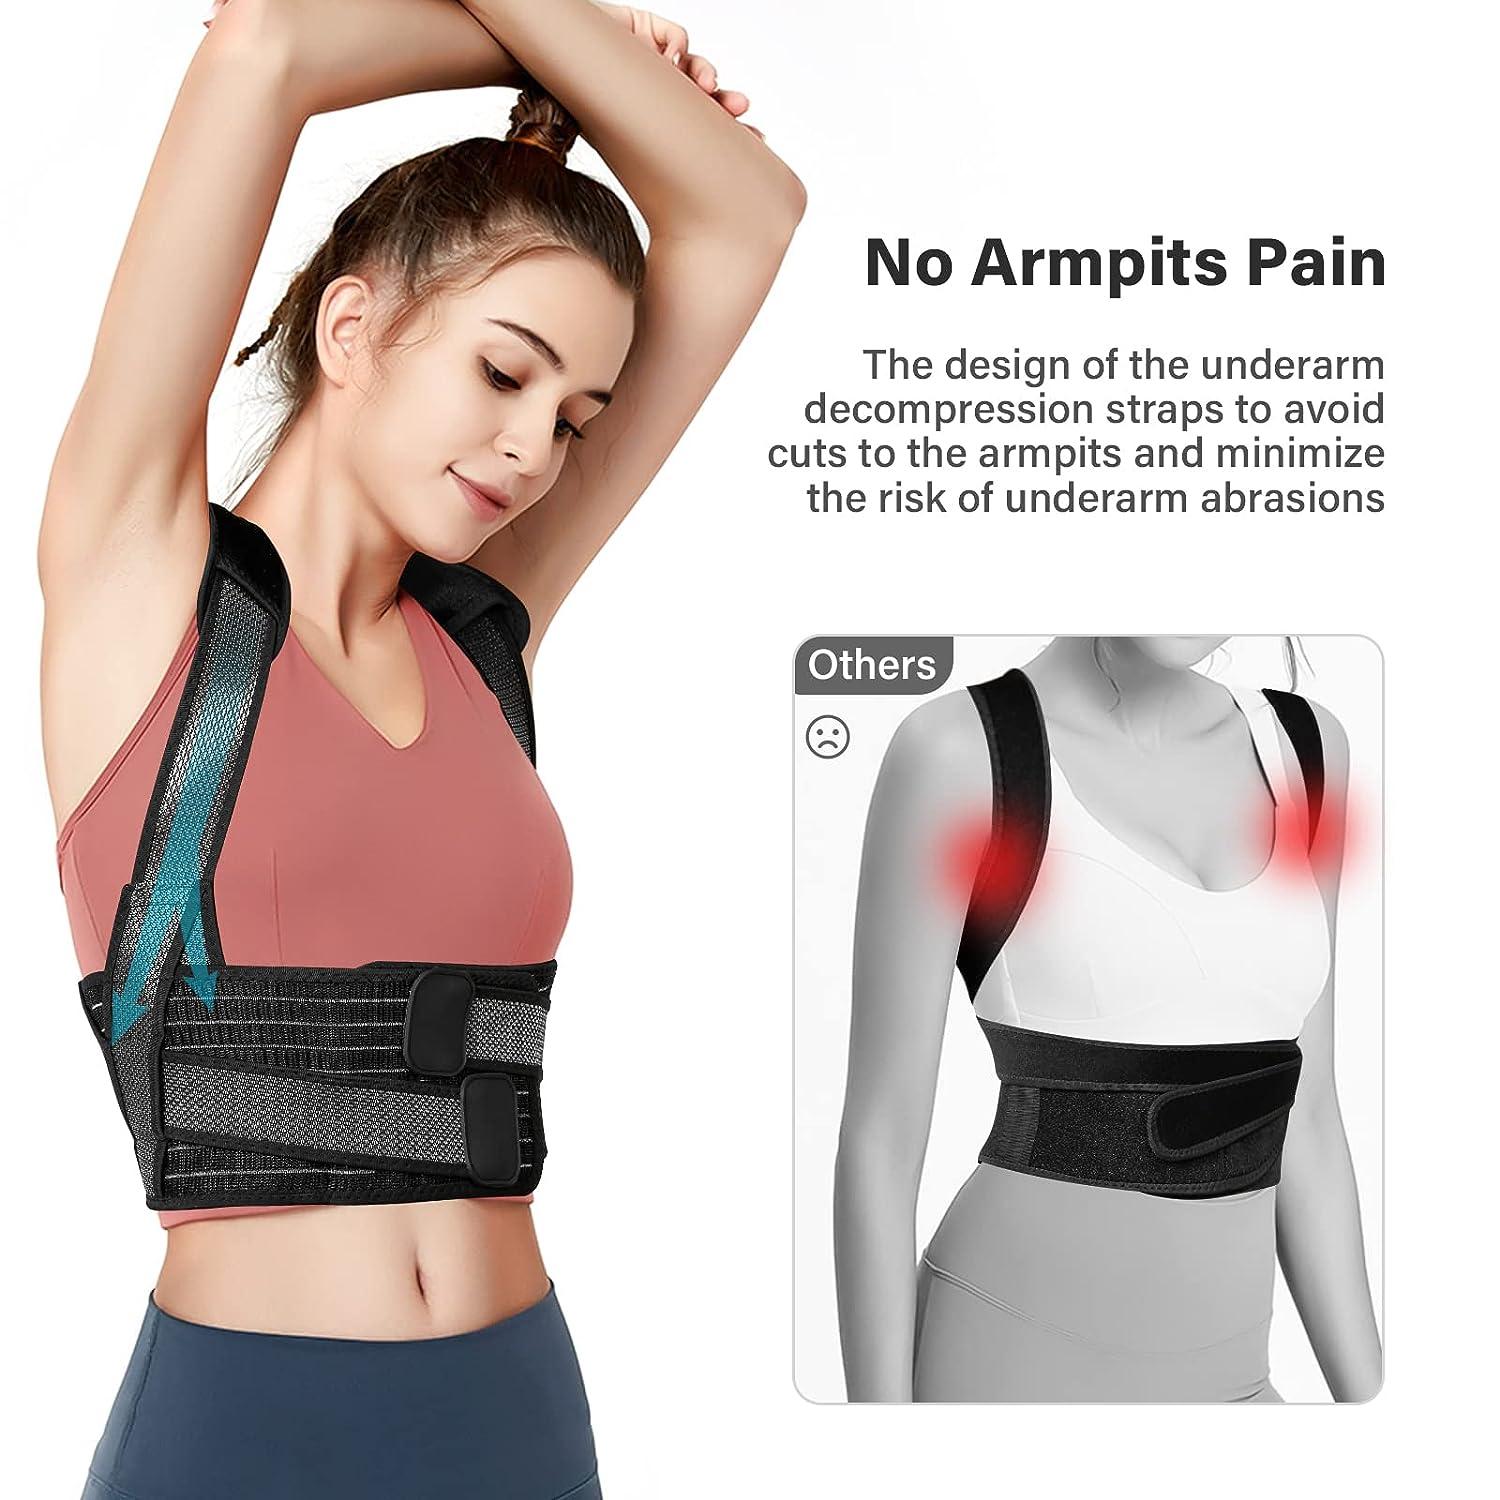 Say Goodbye to Shoulder and Back Pain With This Posture Correcting Bra